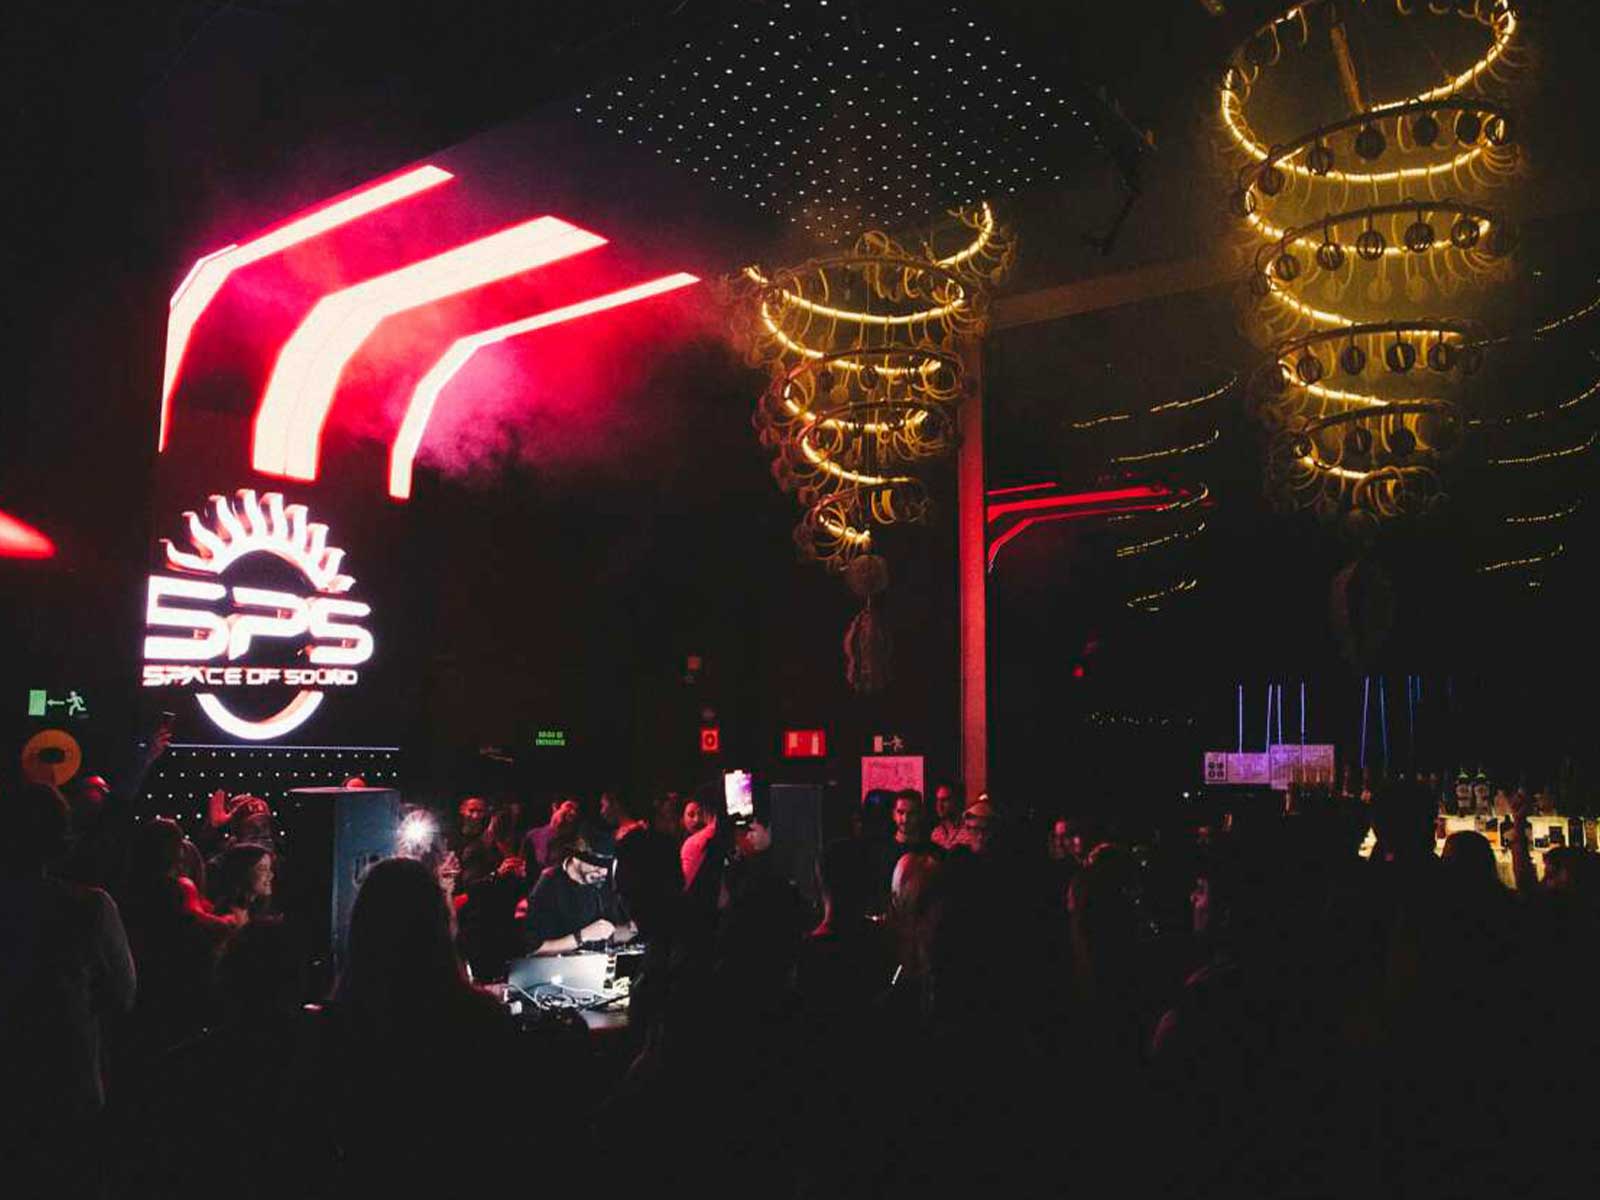 Iconic Space of Sound party returns to Madrid on 15 May